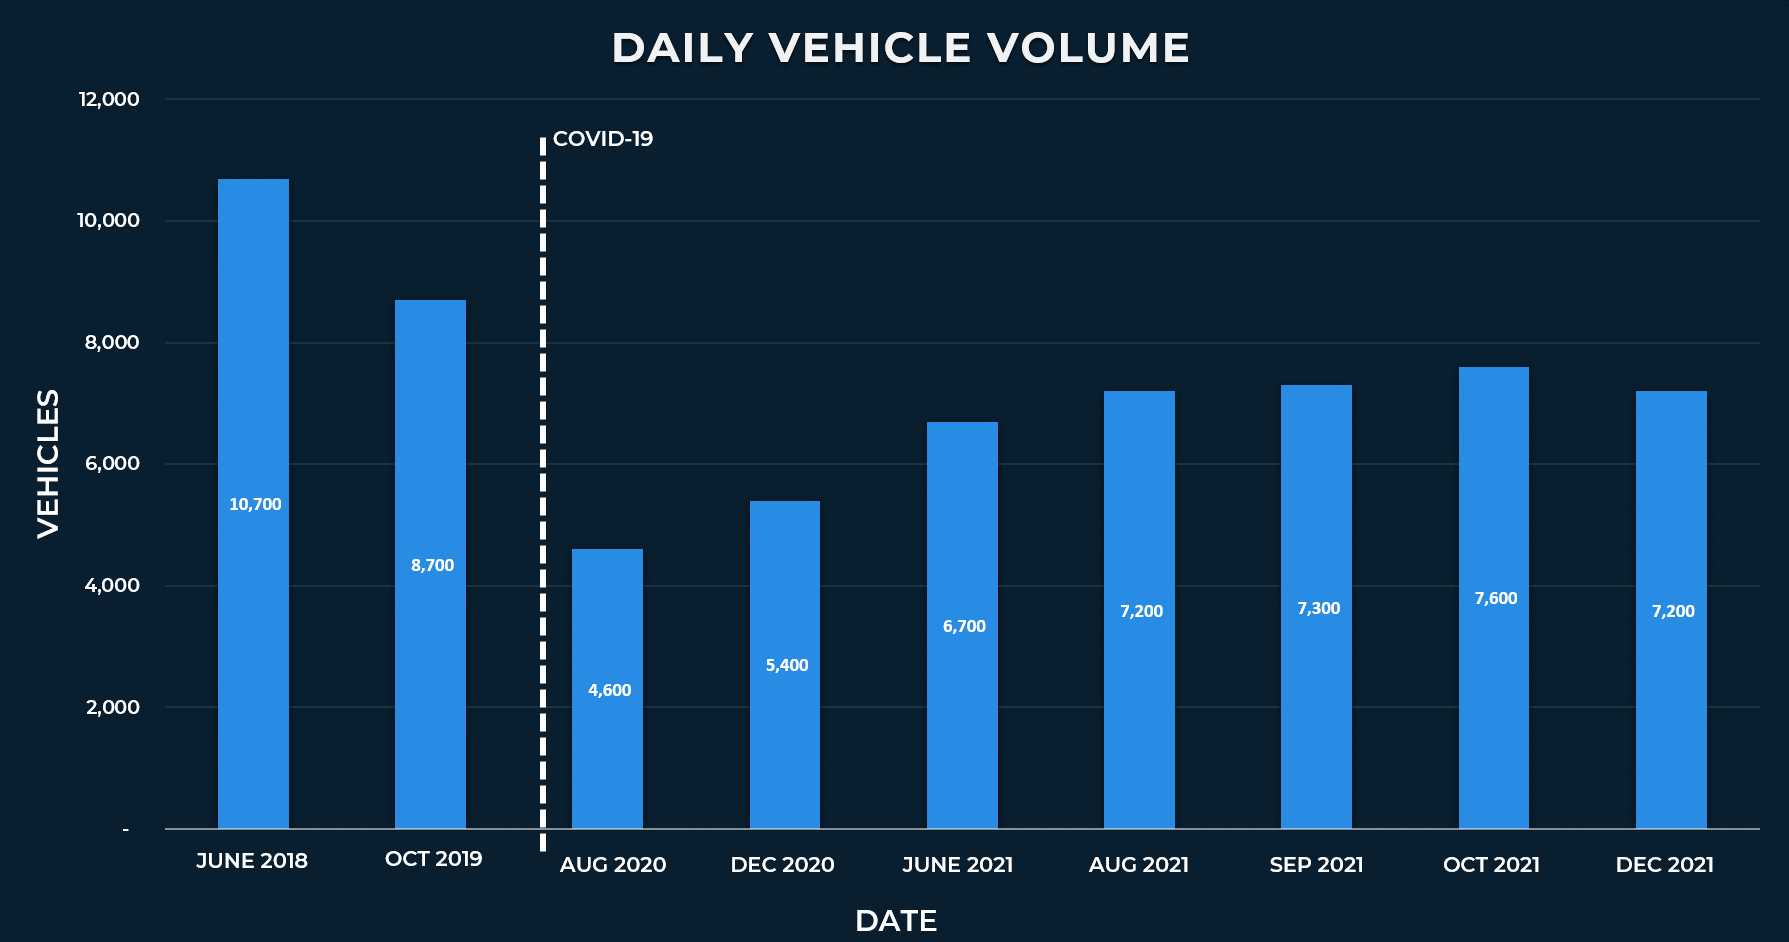 A bar chart shows the total daily traffic volumes we measured on State Street. June 2018: 10,700 October 2019: 8,700 August 2020: 4,600 December 2020: 5,400 June 2021: 6,700 August 2021: 7,200 September 2021: 7,300 October 2021: 7,600 December 2021: 7,200